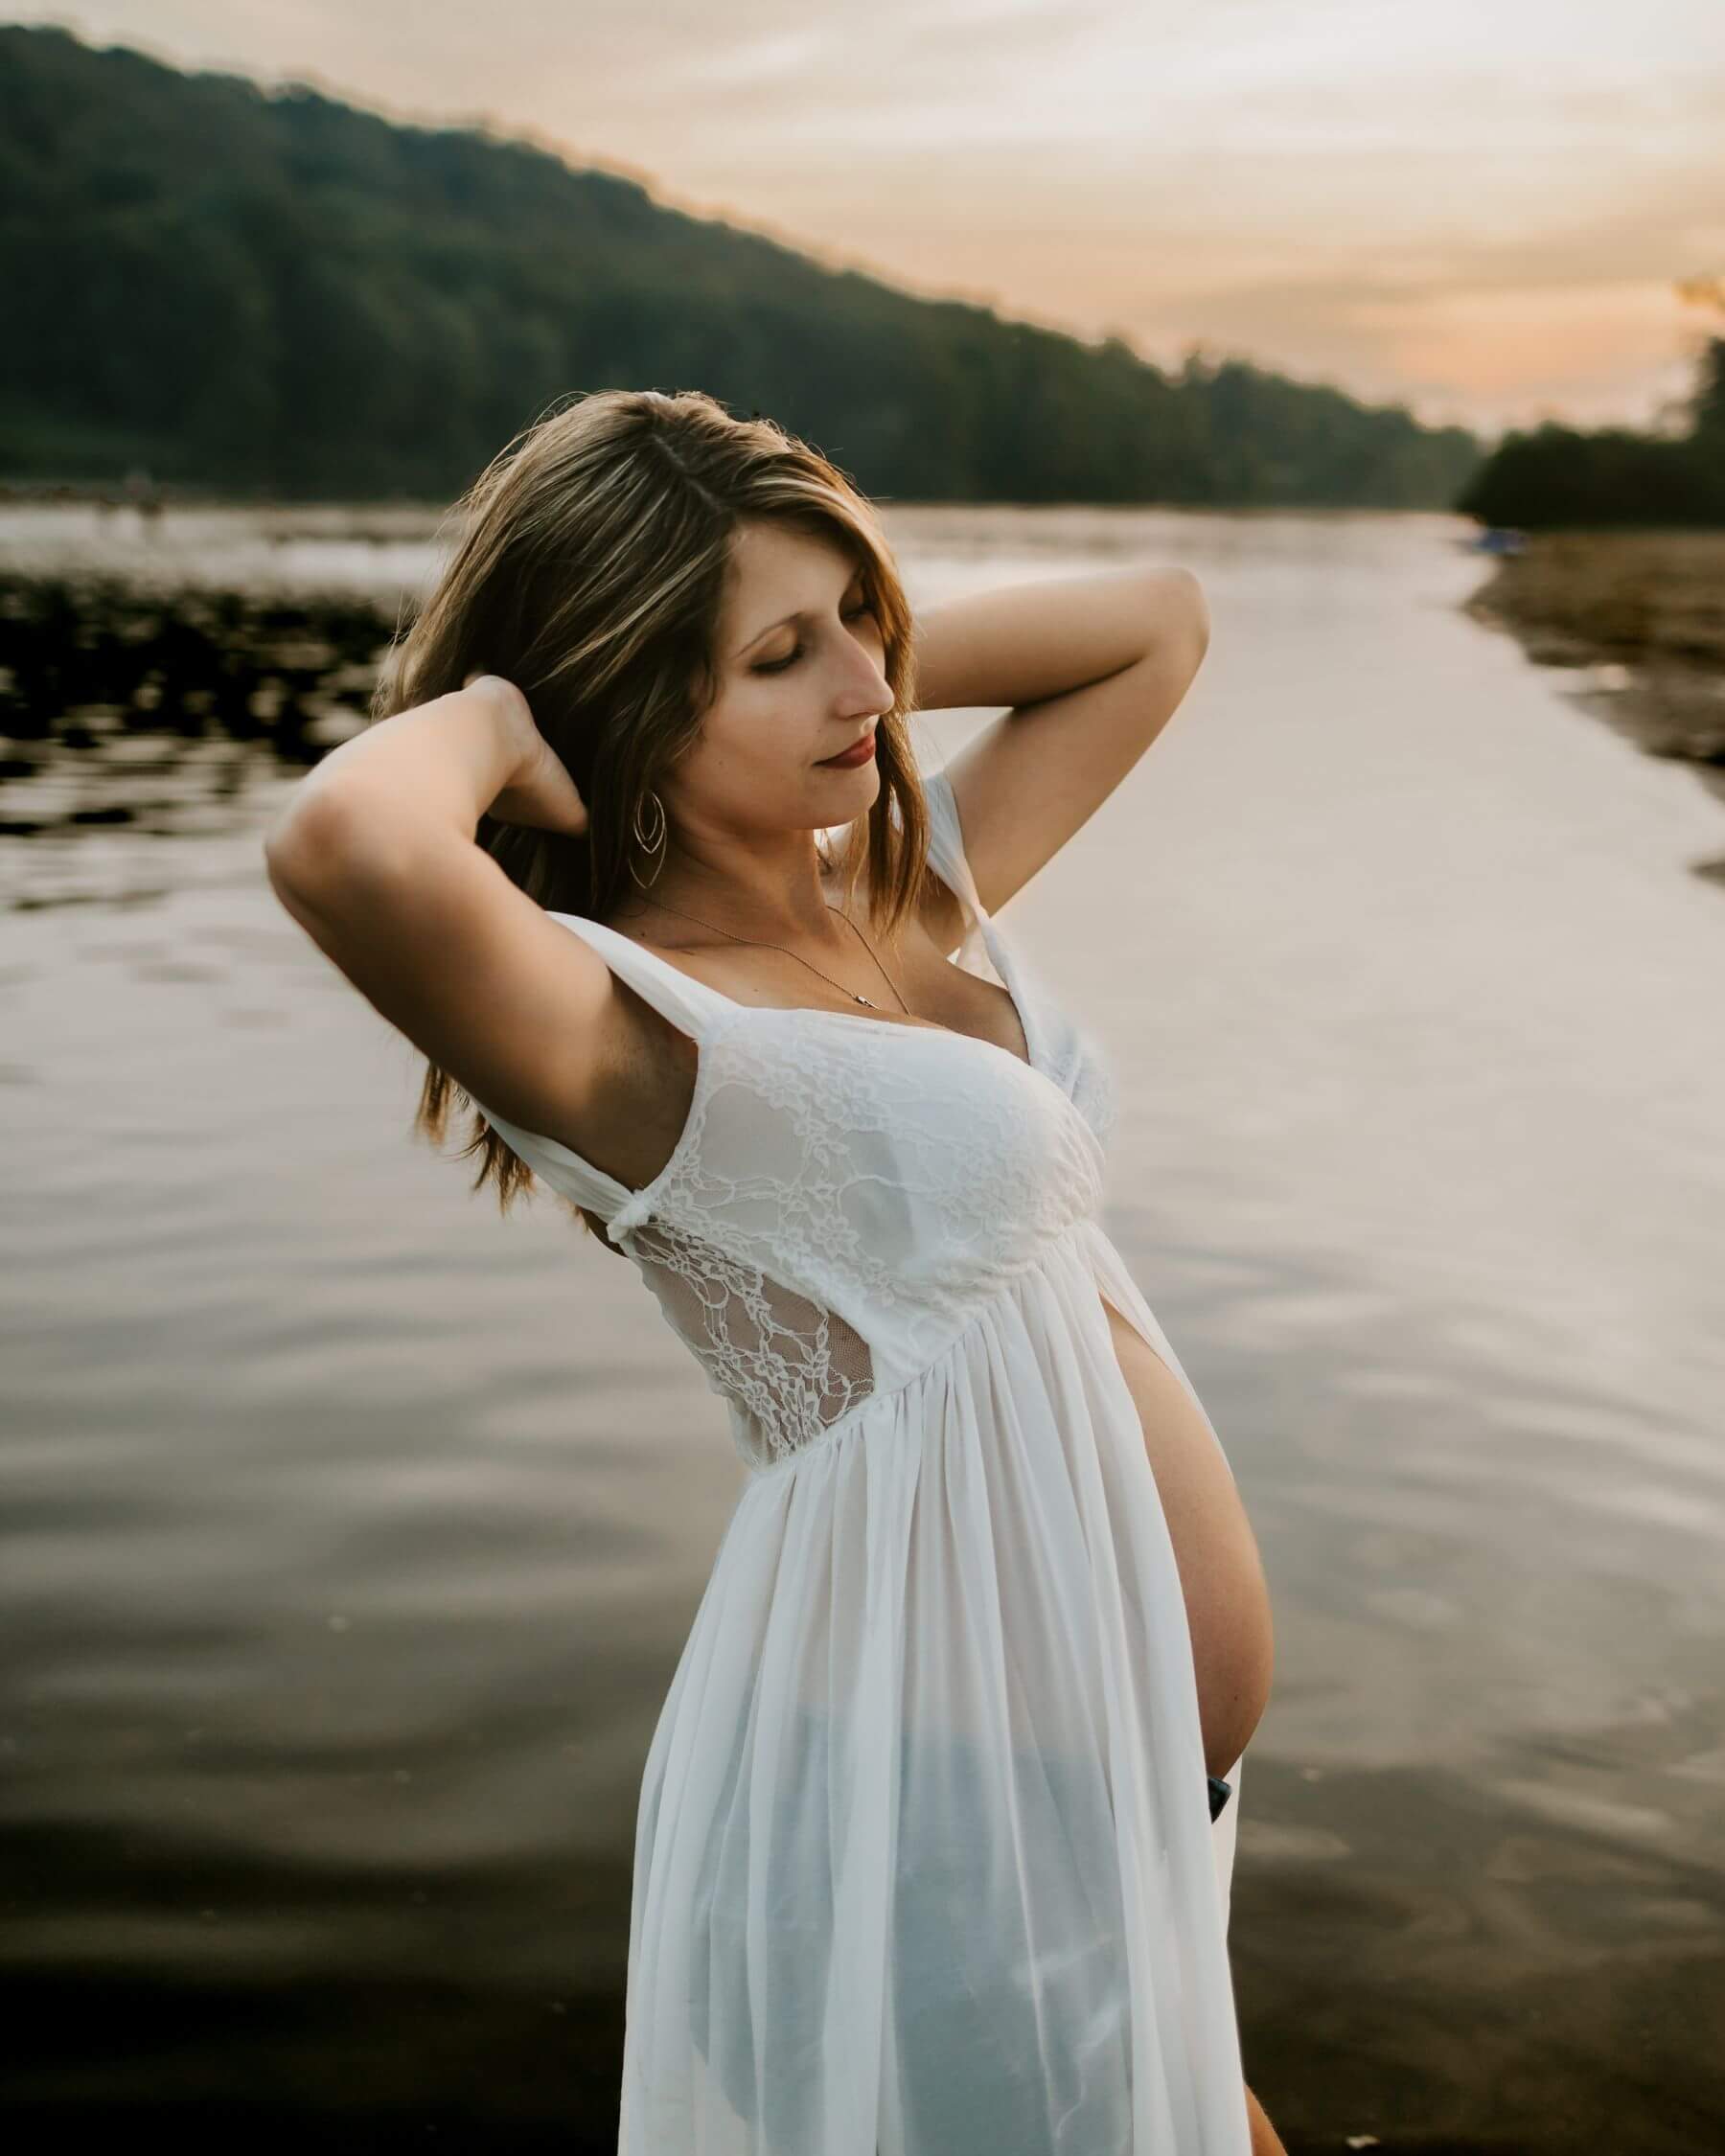 A mother to be in a white open slip with hands in her hair at the edge of the water at sunset after a pittsburgh prenatal massage